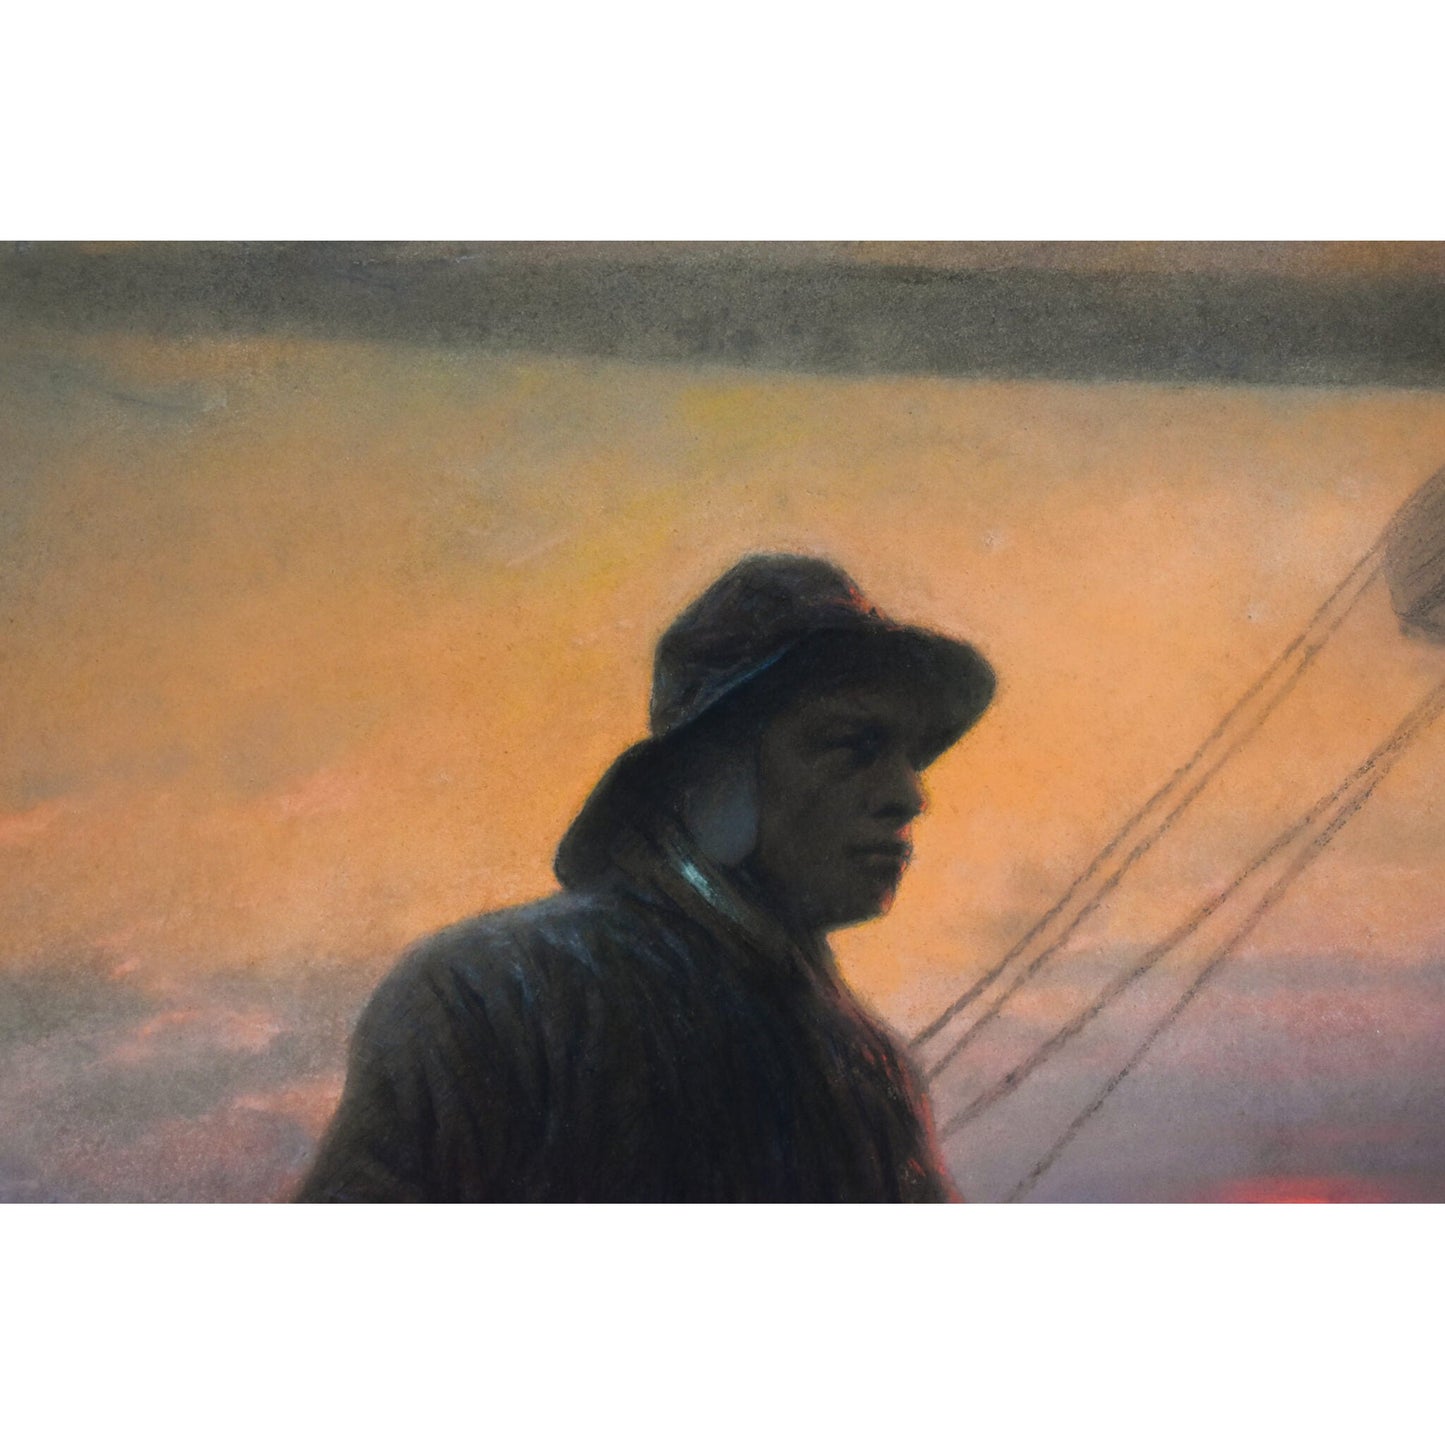 Antique pastel painting scene of a helmsman aboard his ship, by Guillaume Alaux, for sale at Winckelmann Gallery